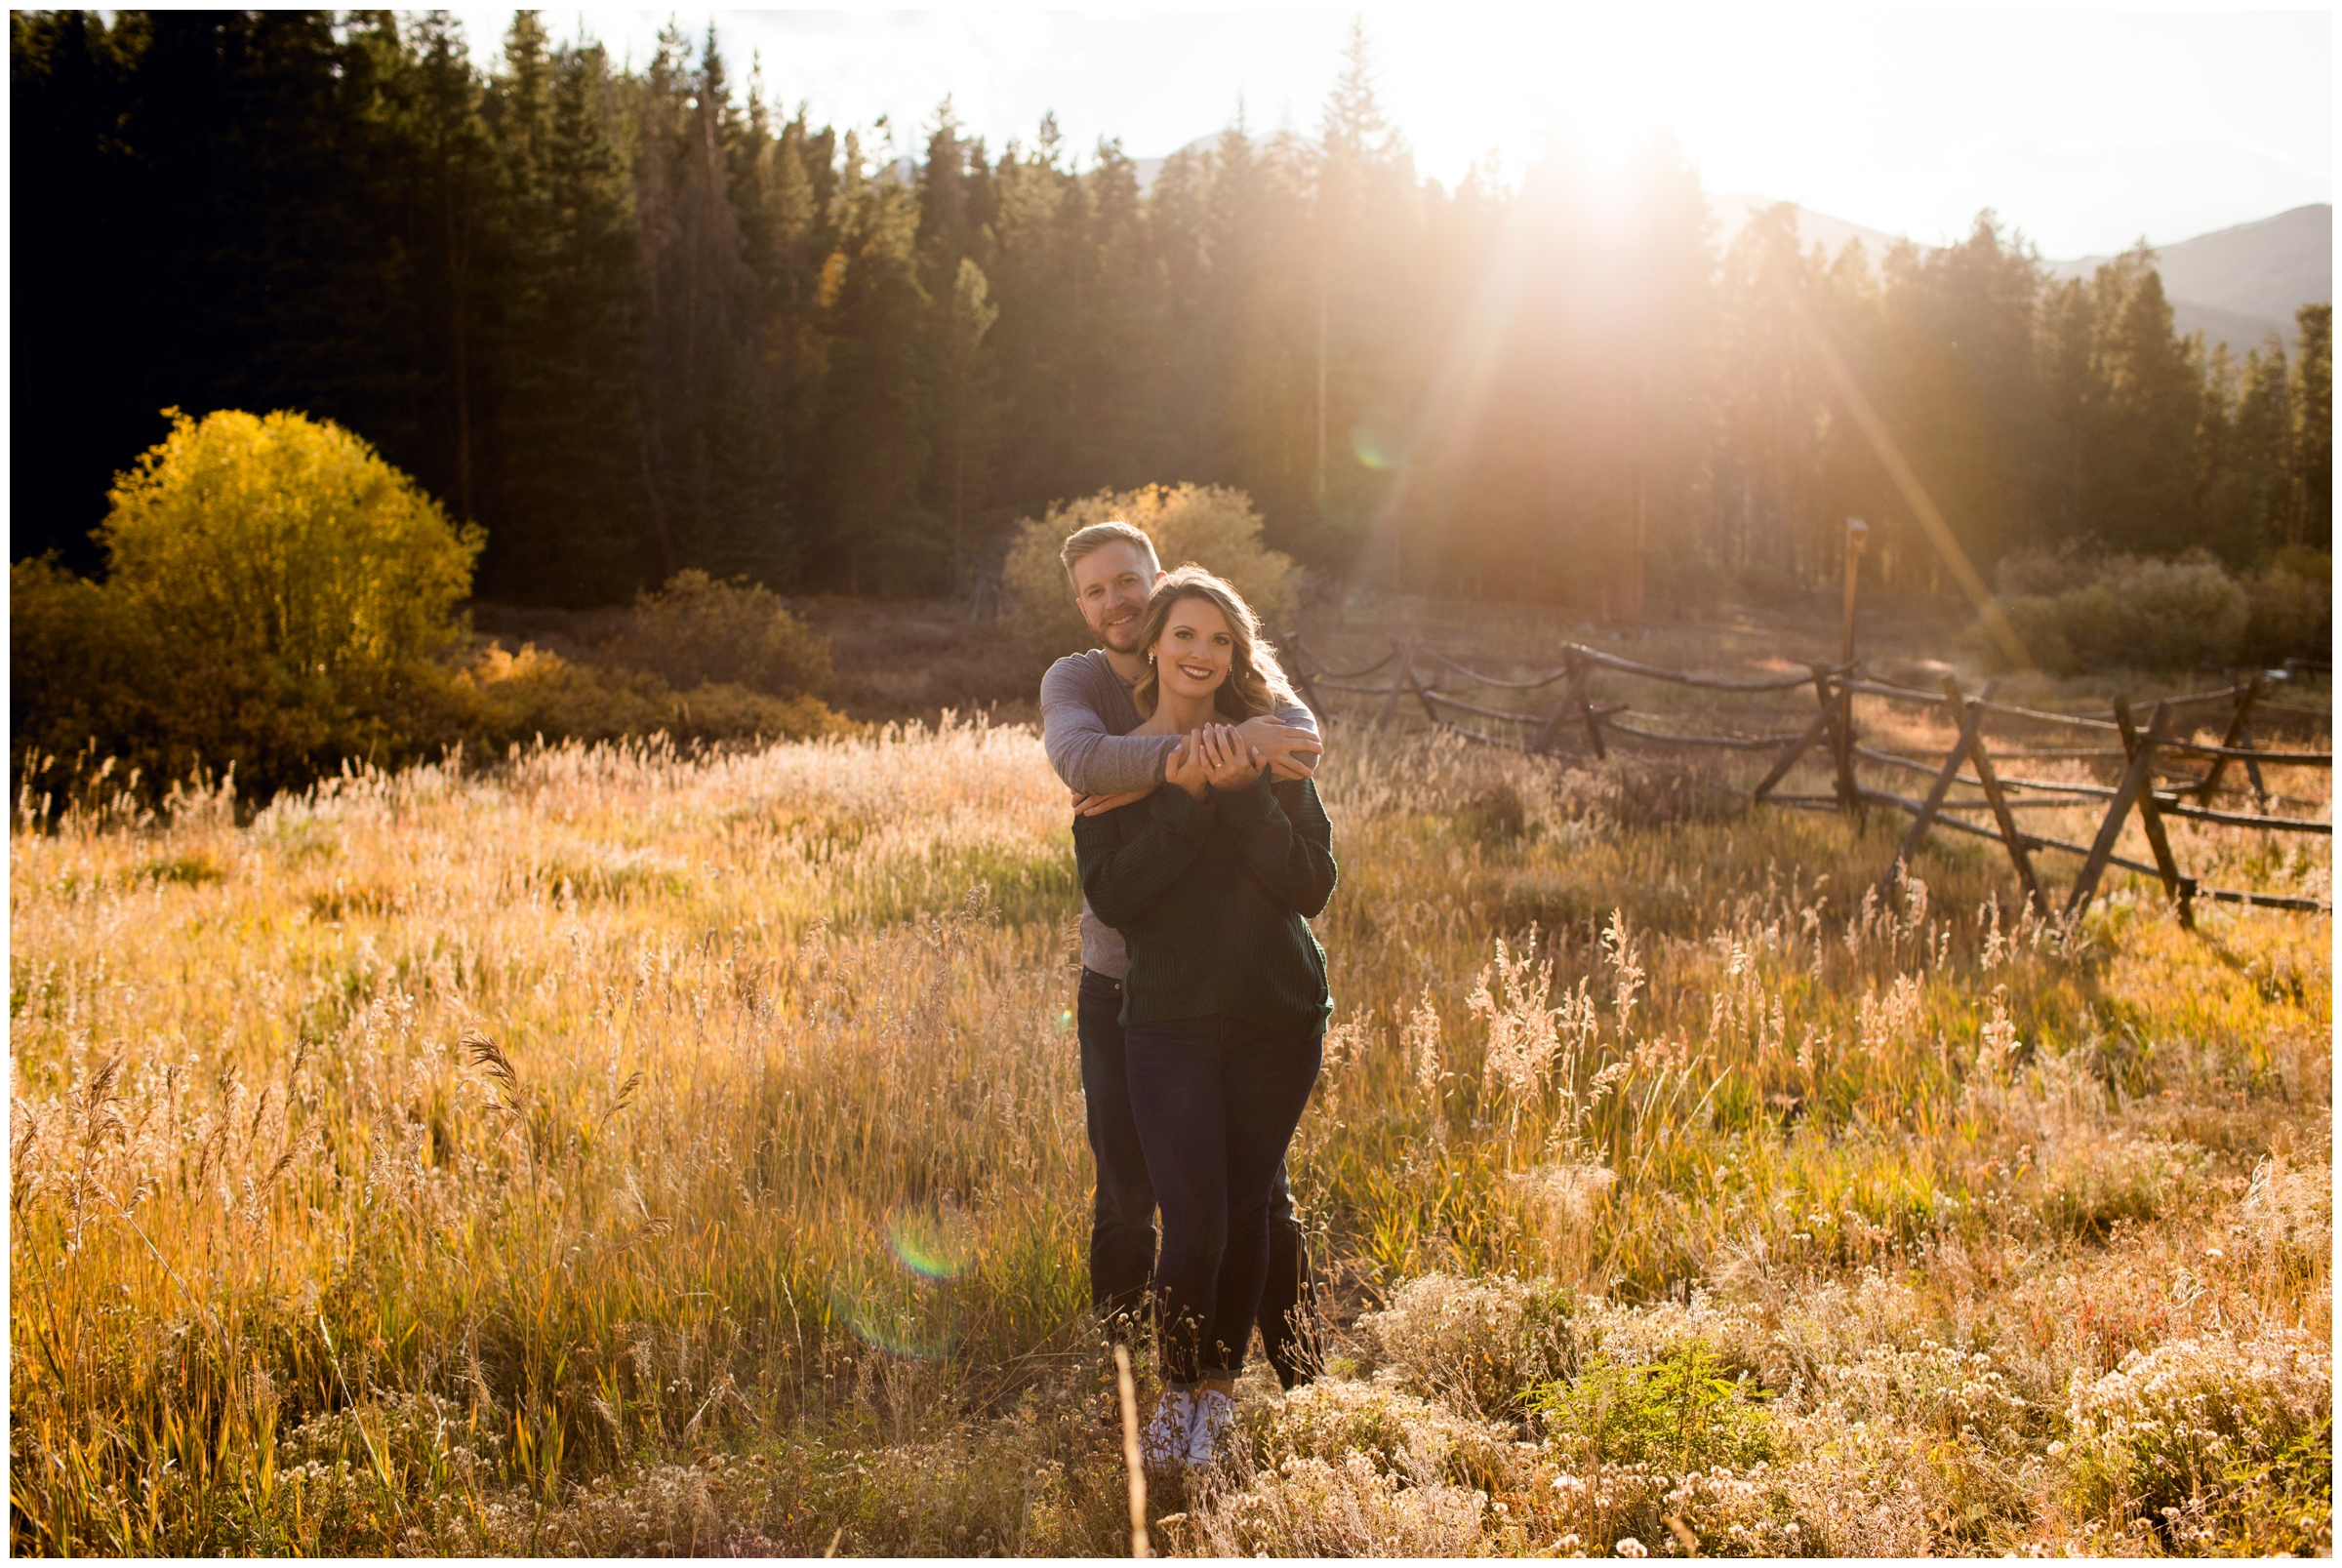 sunny fall engagement photography inspiration in Breckenridge CO